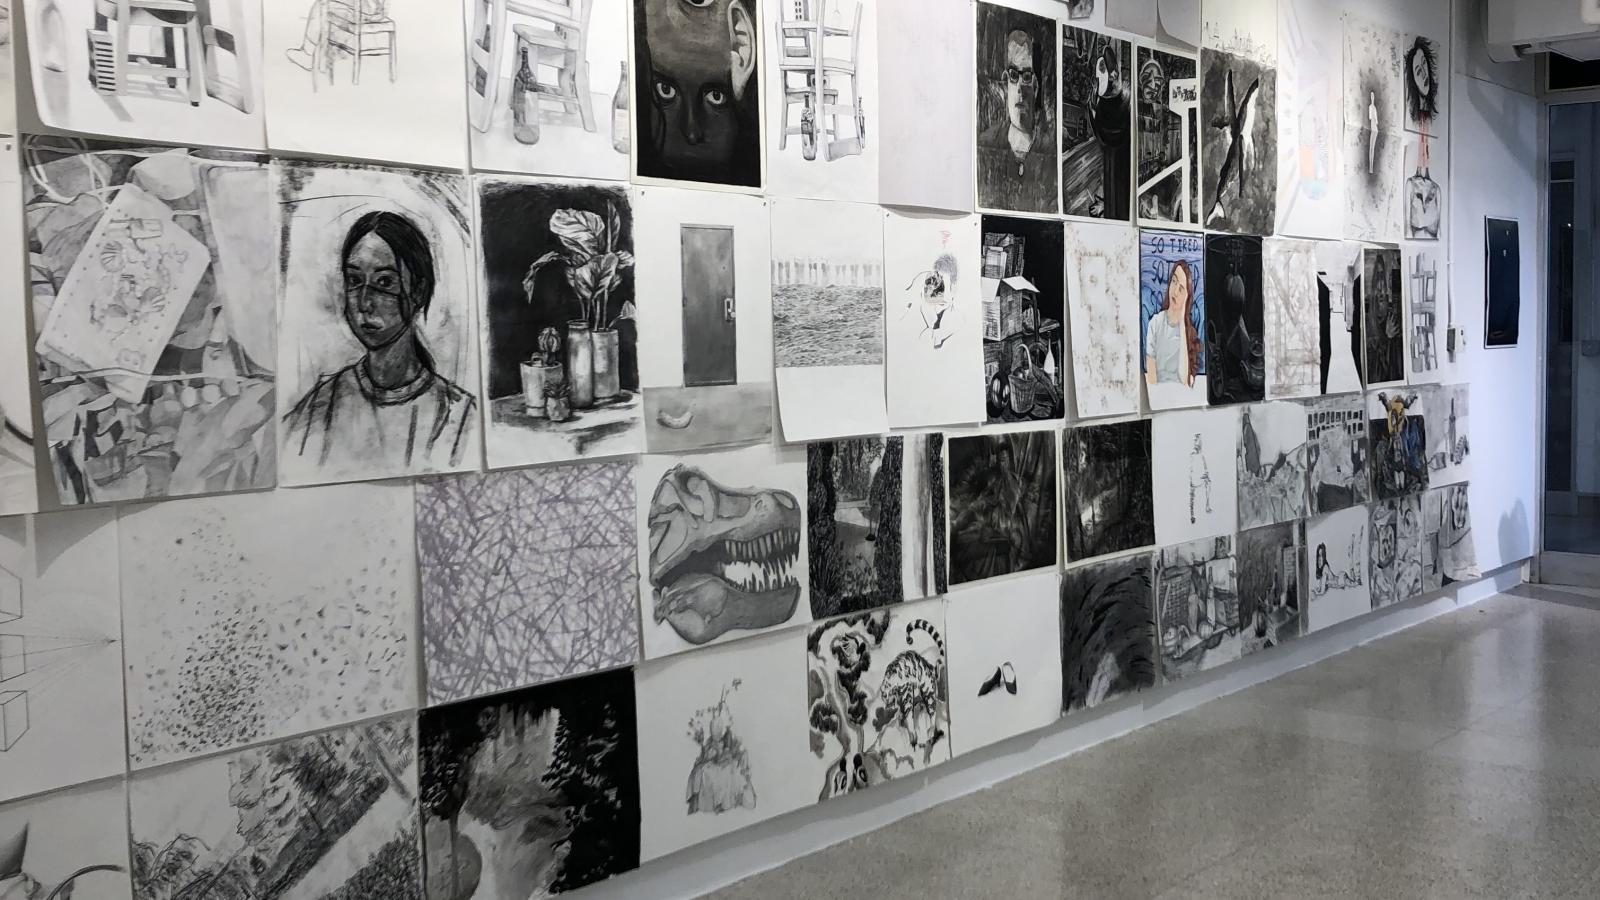 long shot of the exhibit wall with many student drawings